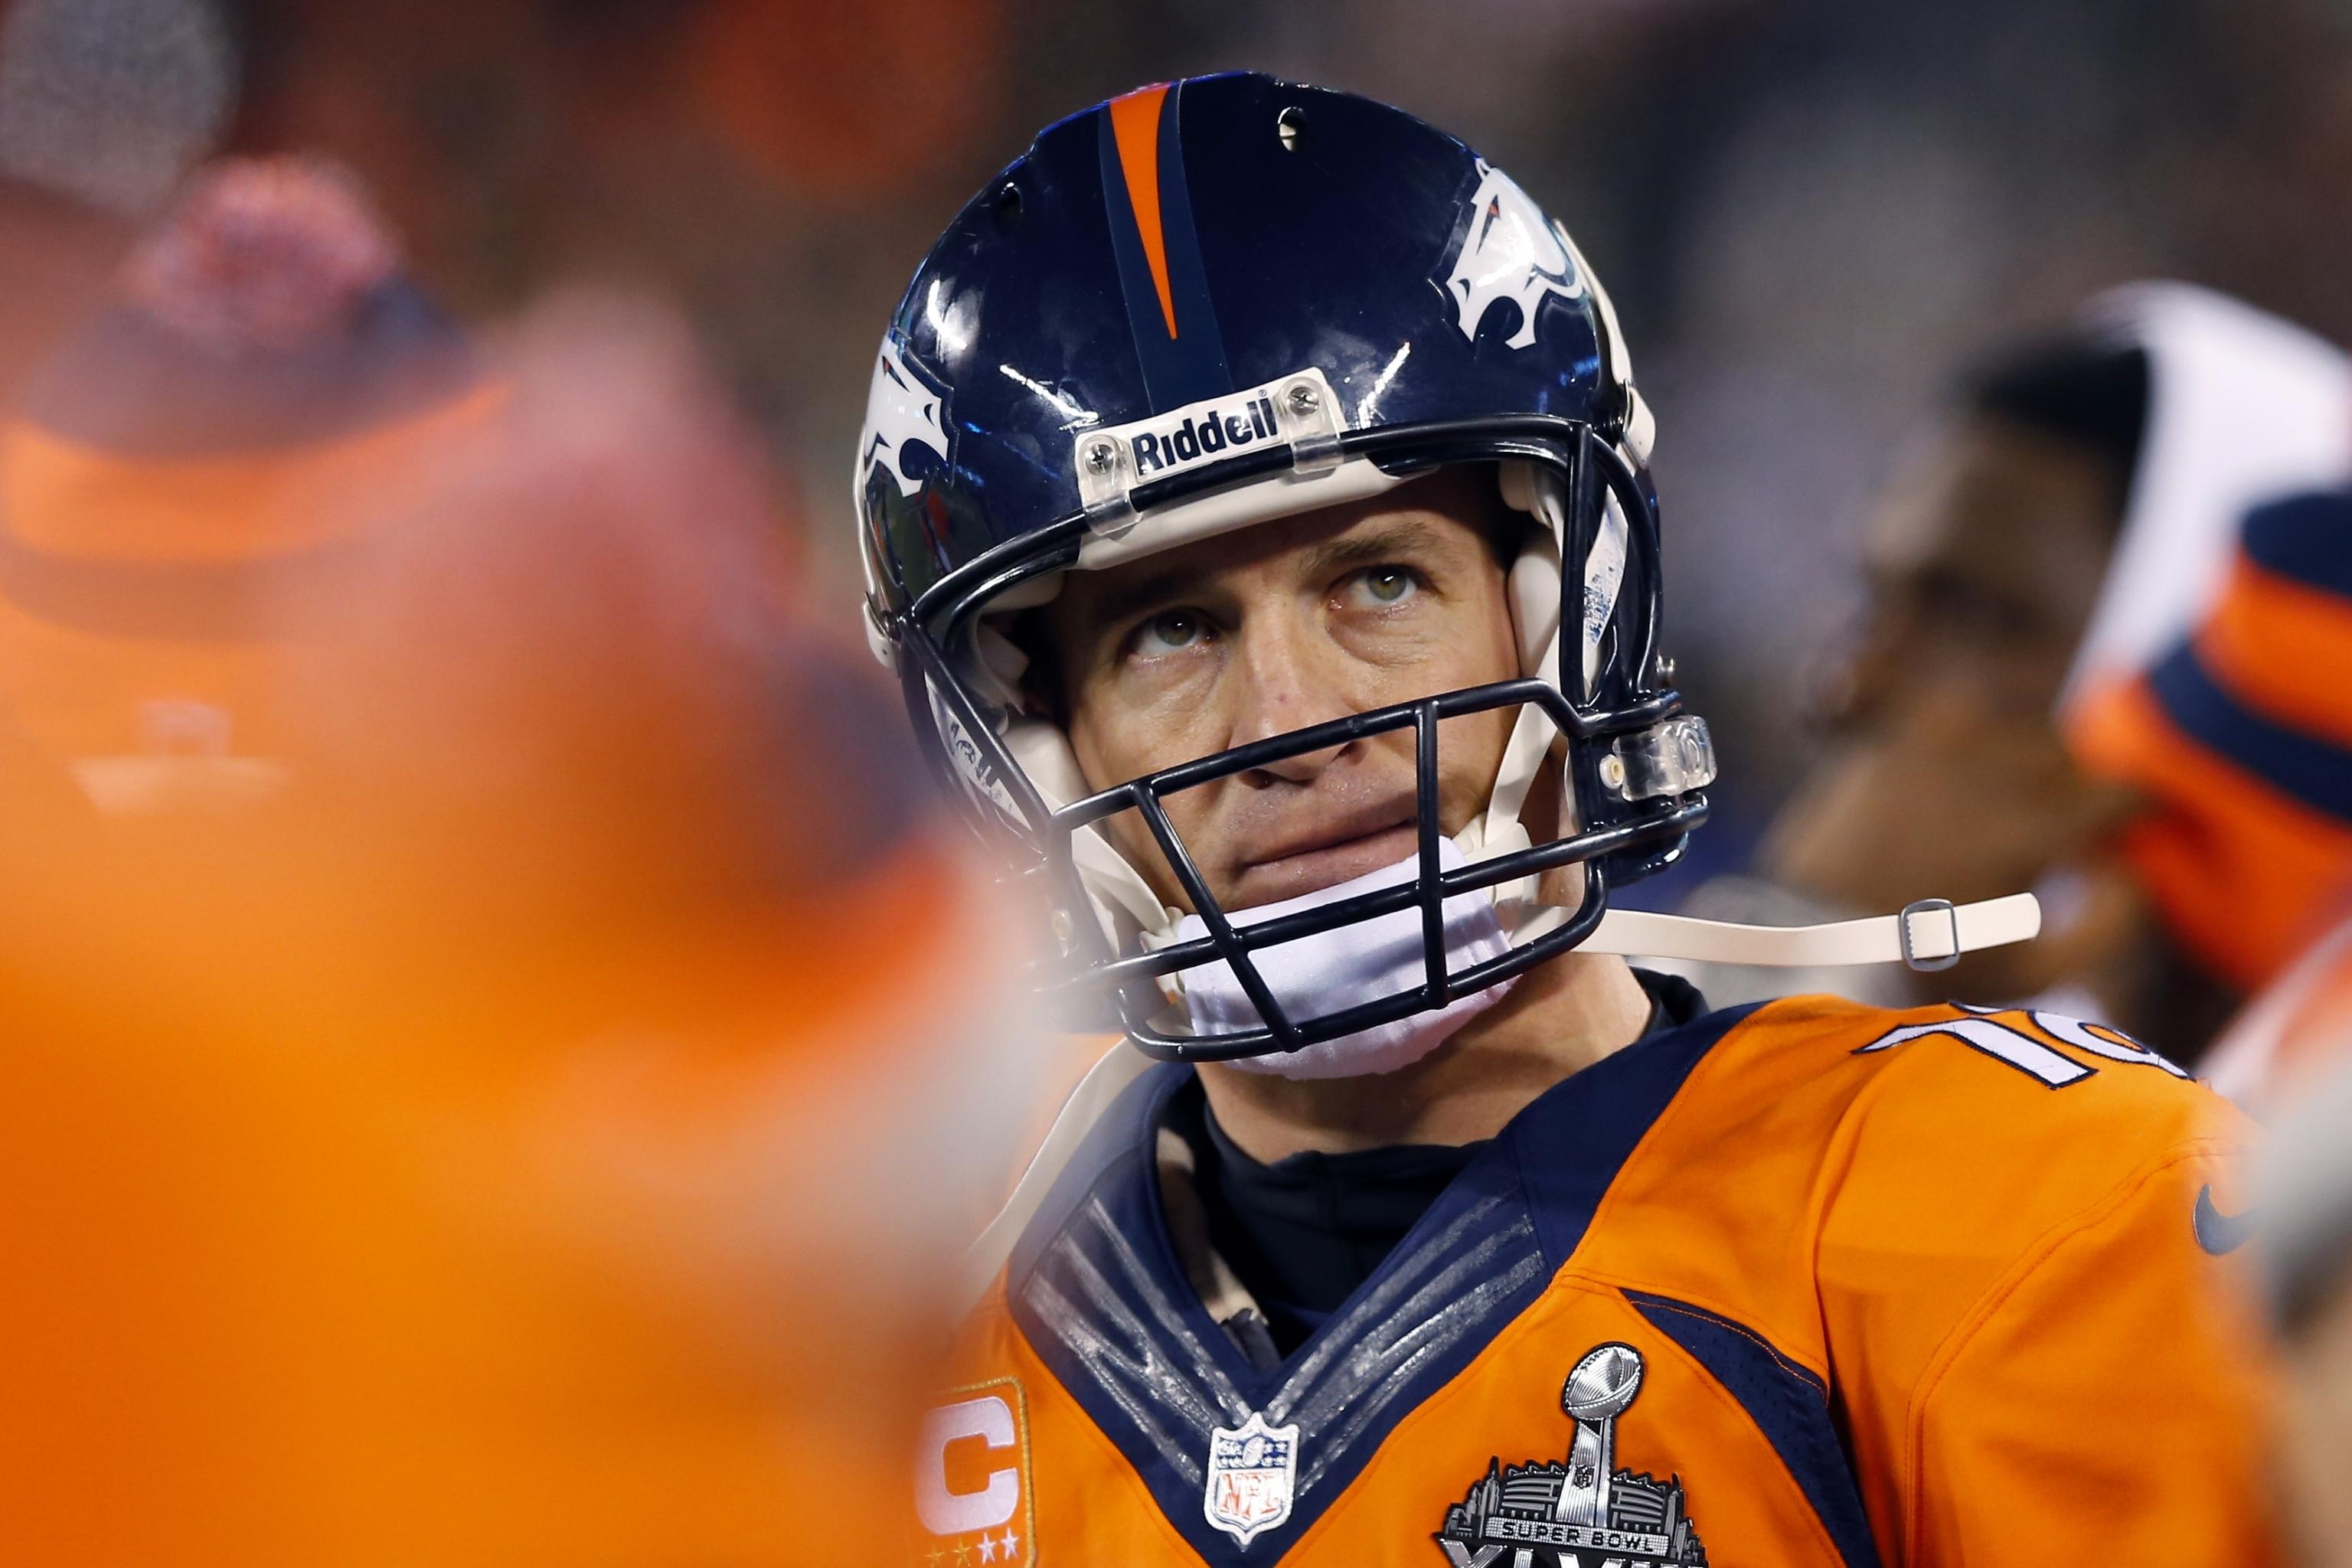 Does Playoff Record Preclude Peyton Manning from Greatest of All